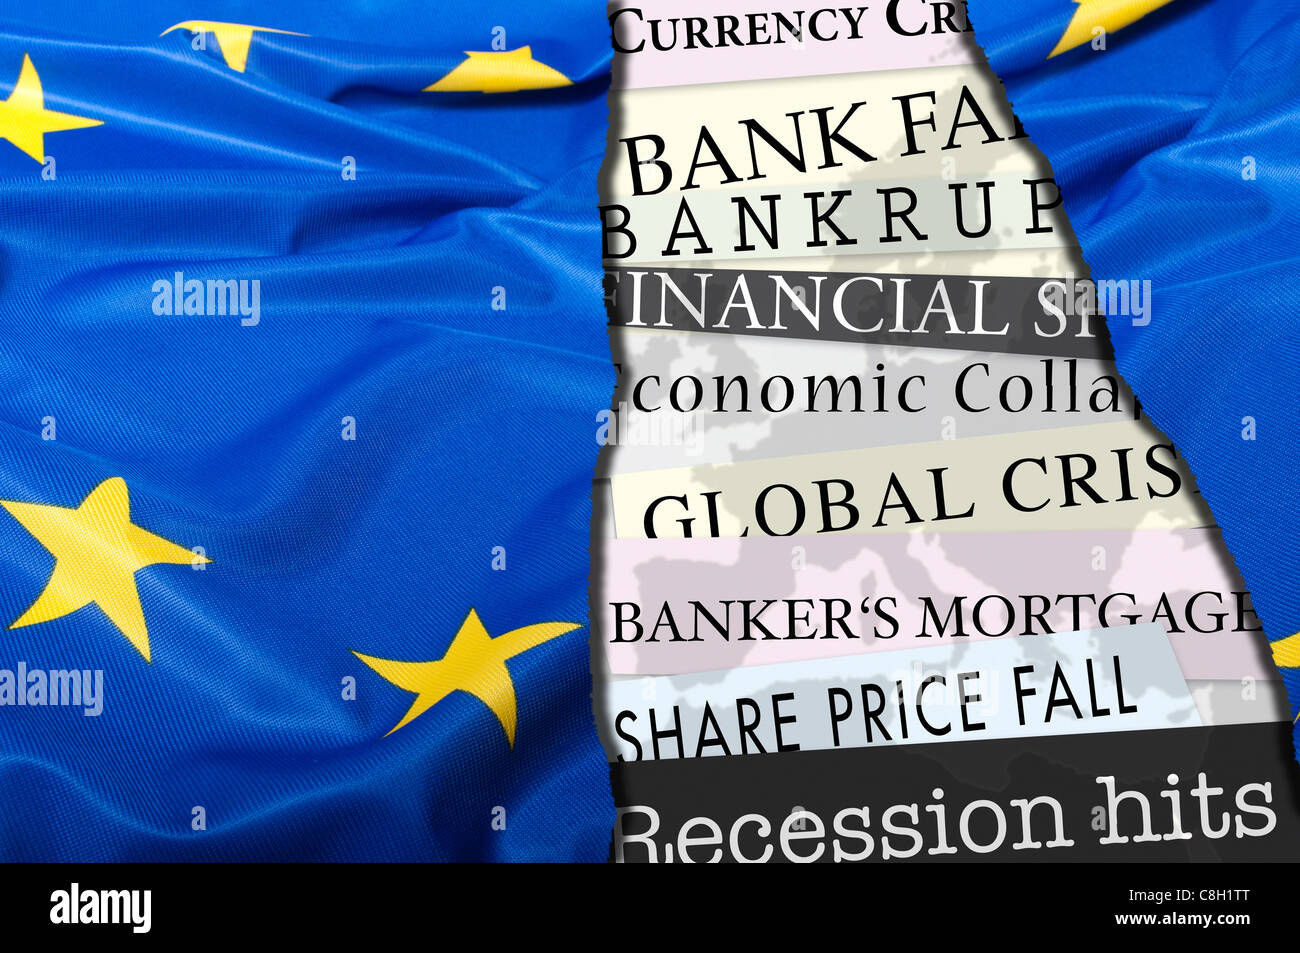 Financial Crisis in Europe - Newsletters Headlines about Financial Crisis With Flag of European Union Stock Photo